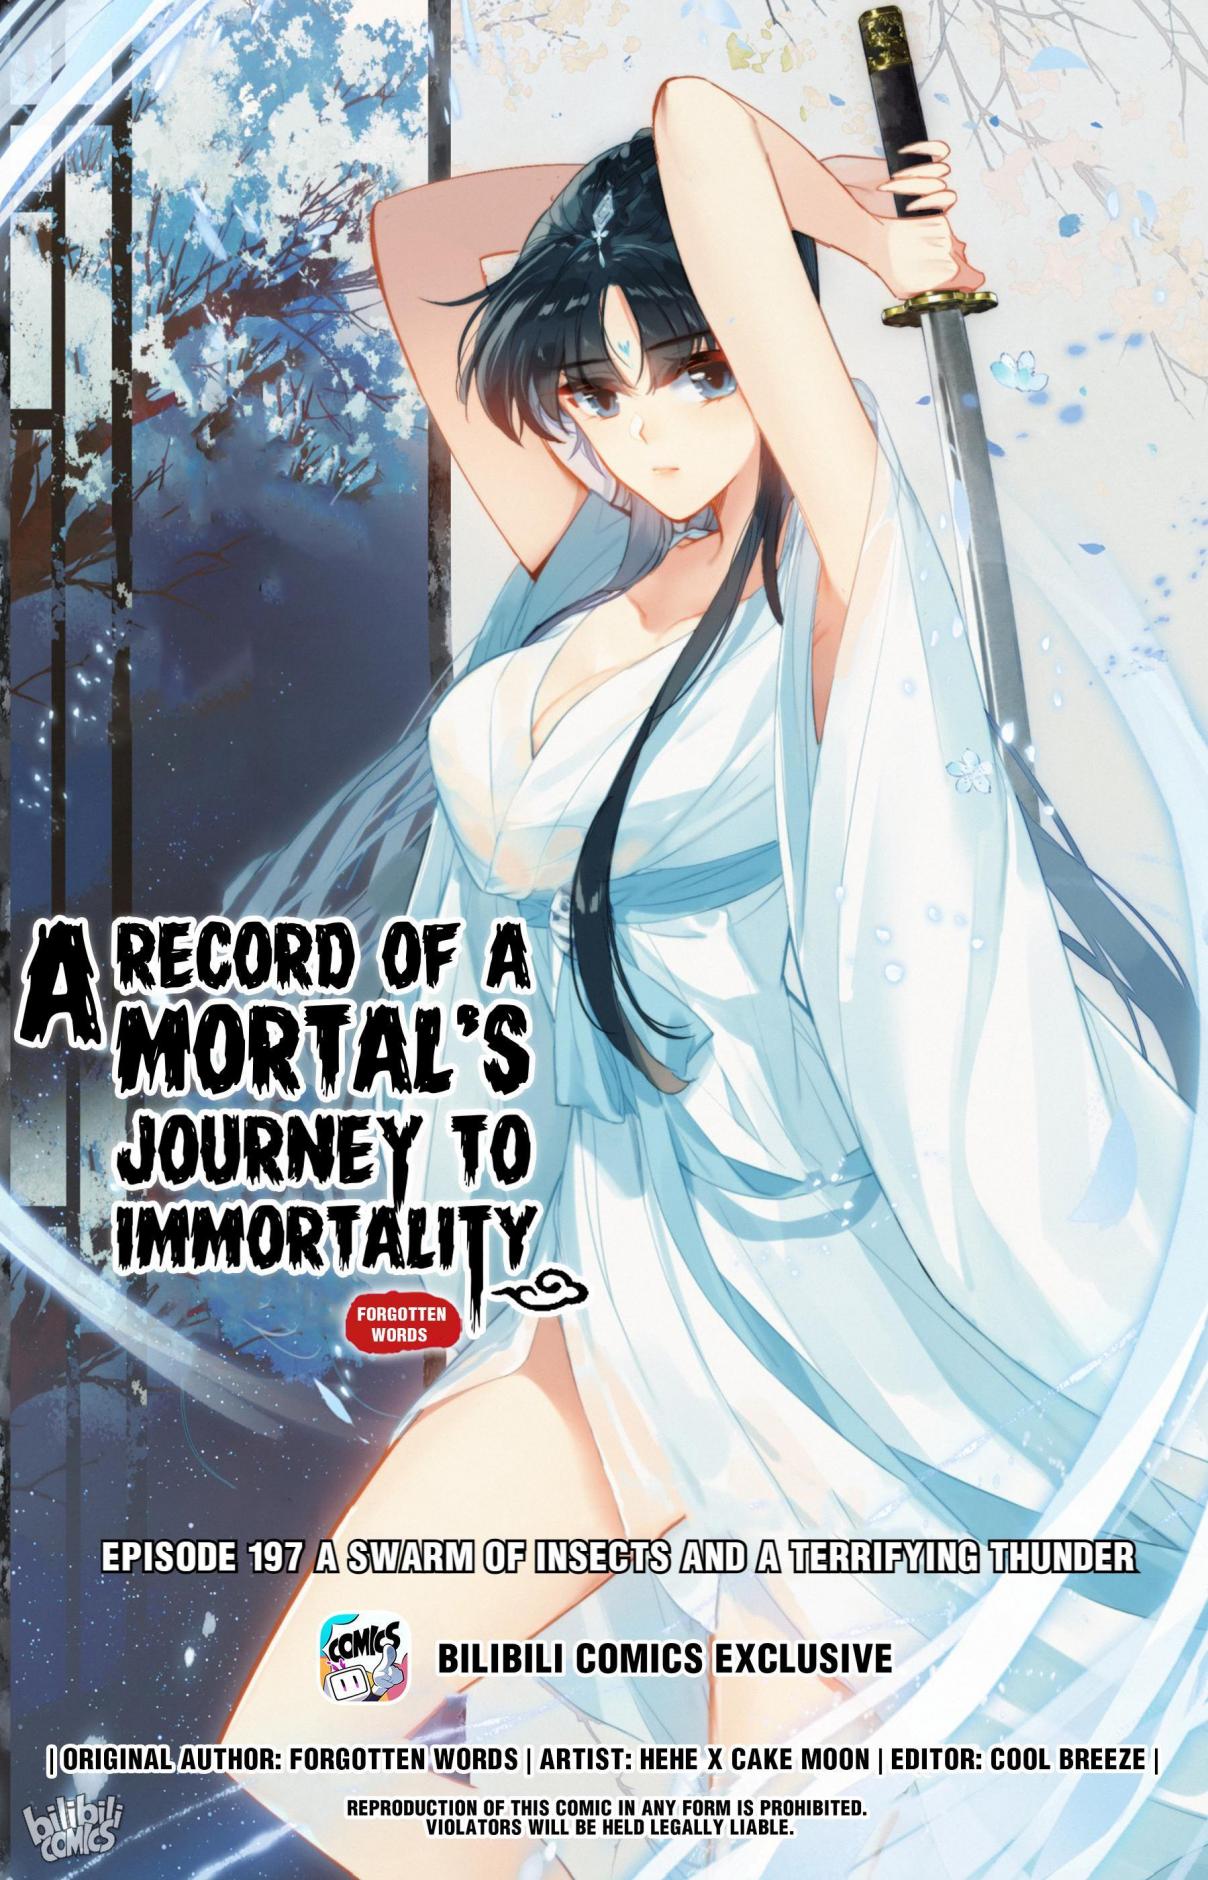 A Record of a Mortal's Journey to Immortality 197